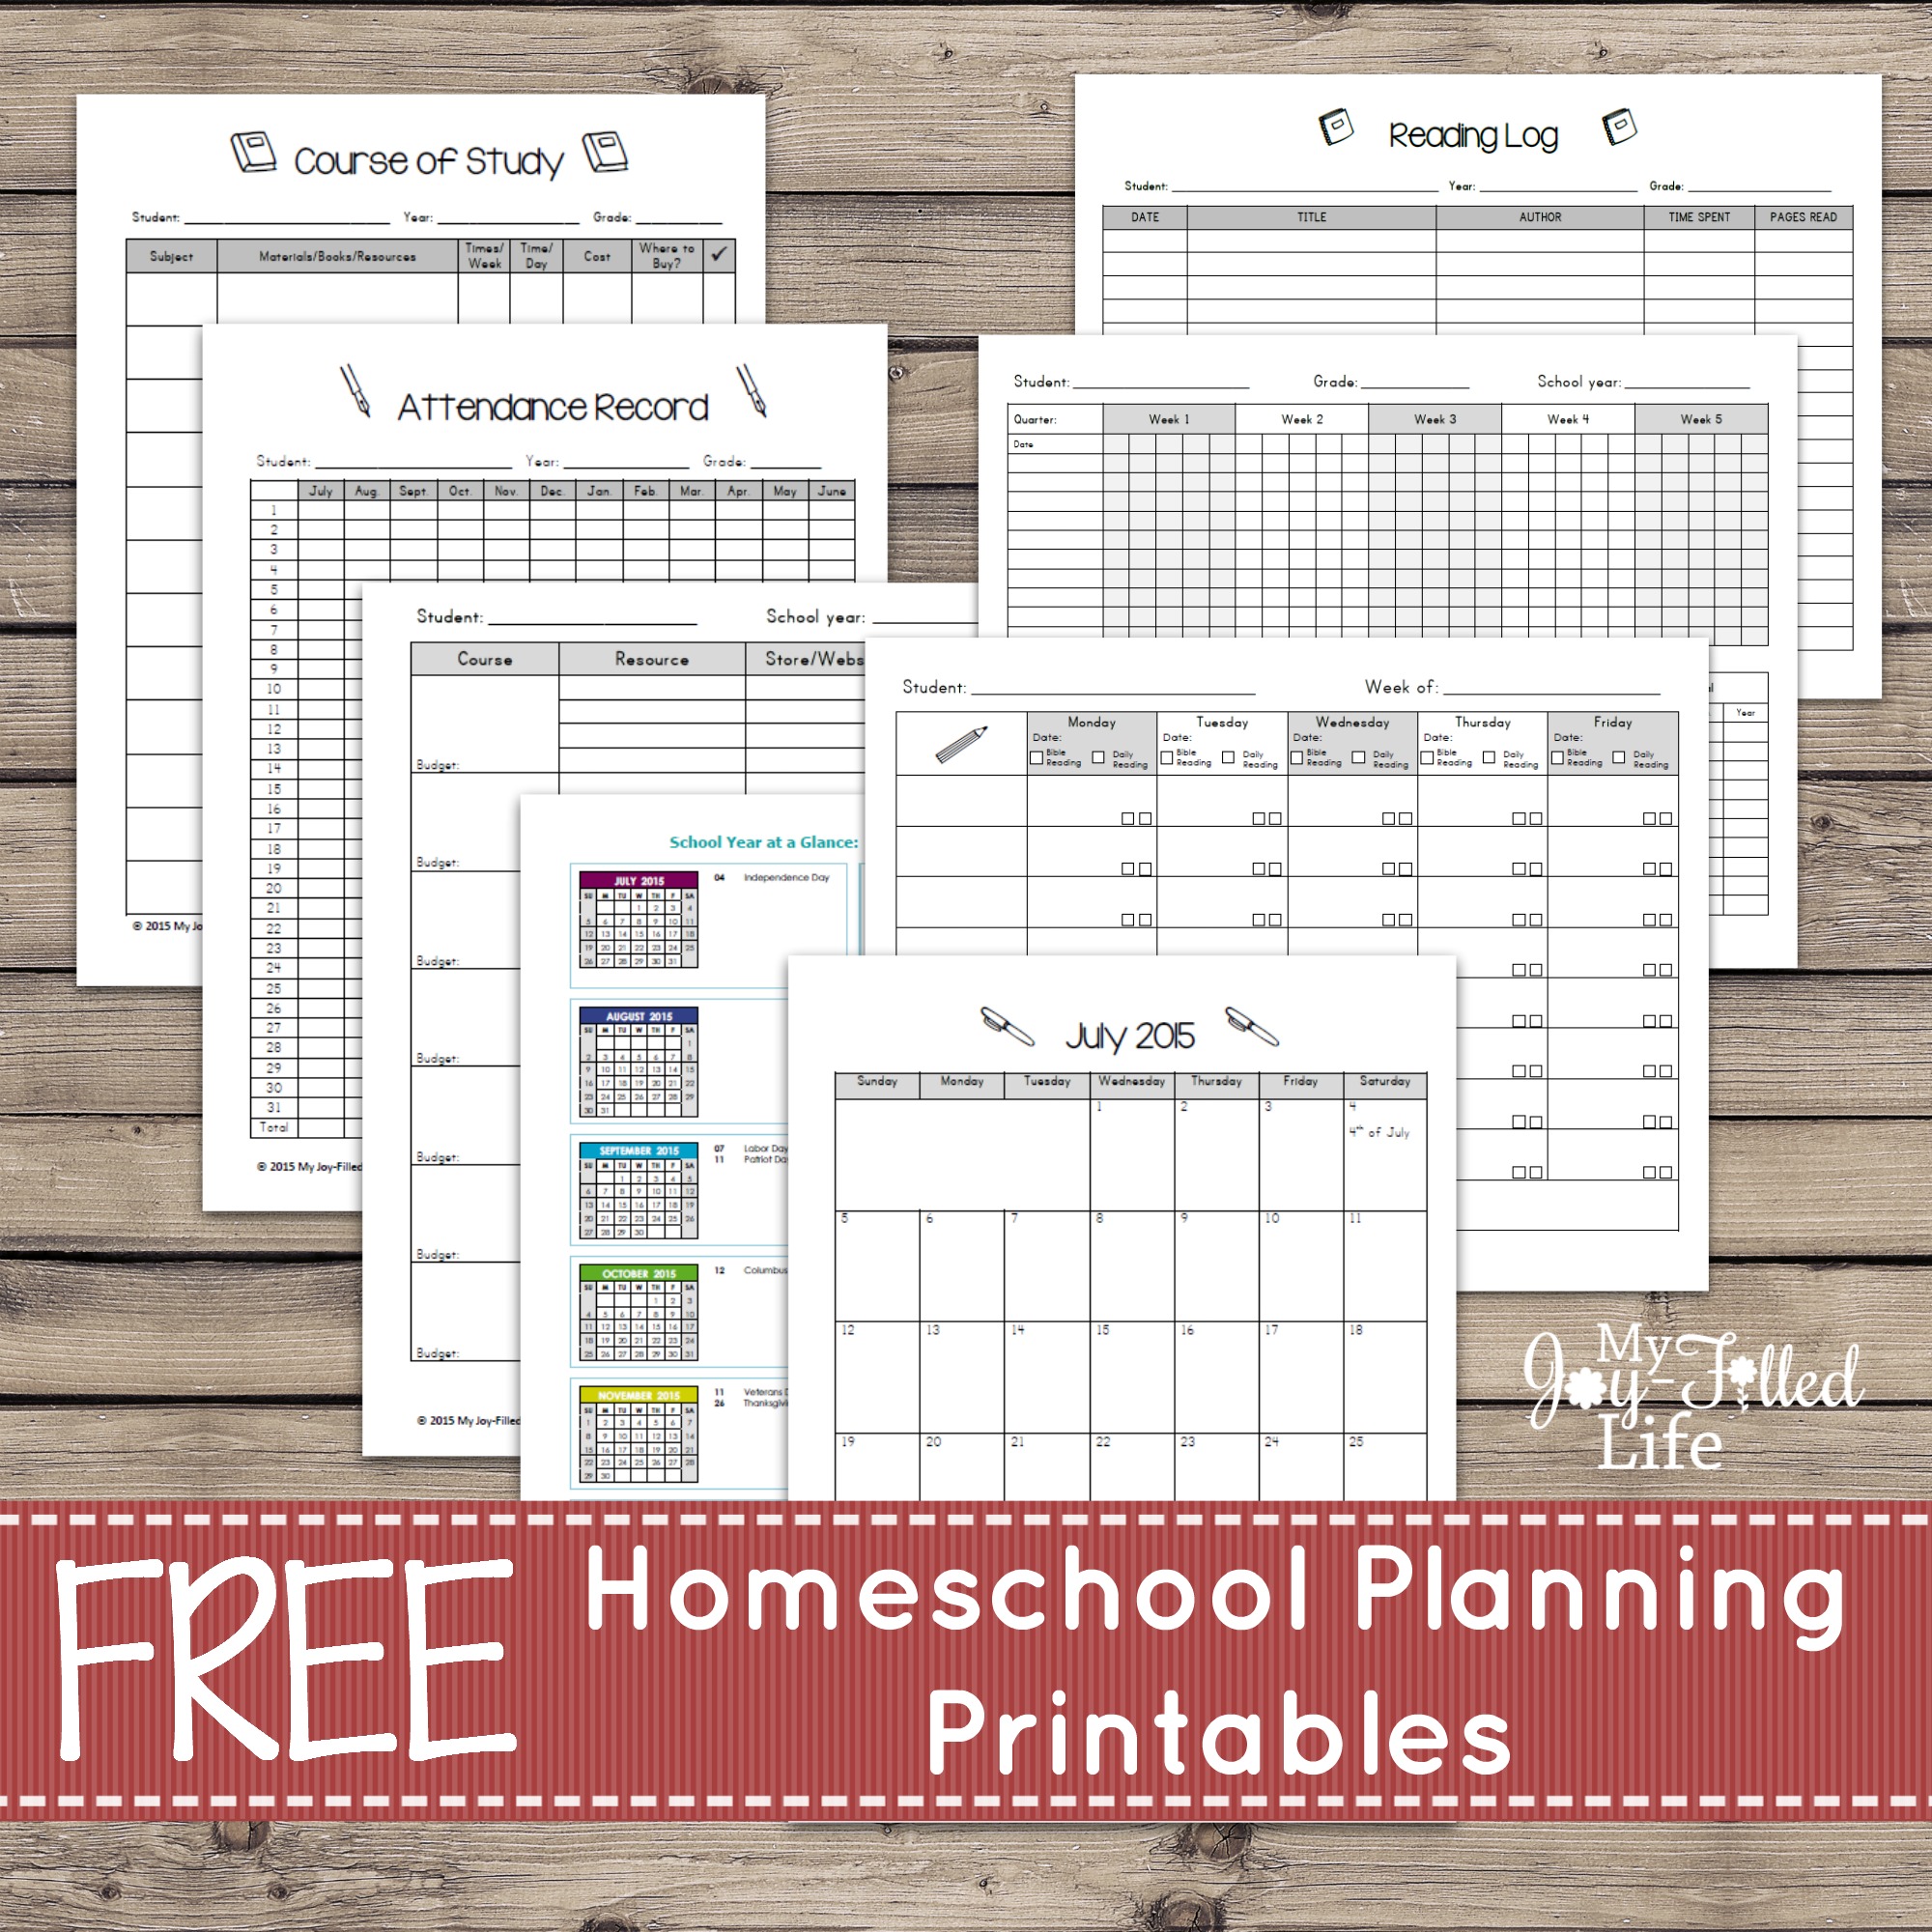 homeschool-planning-resources-free-printable-planning-pages-my-joy-filled-life